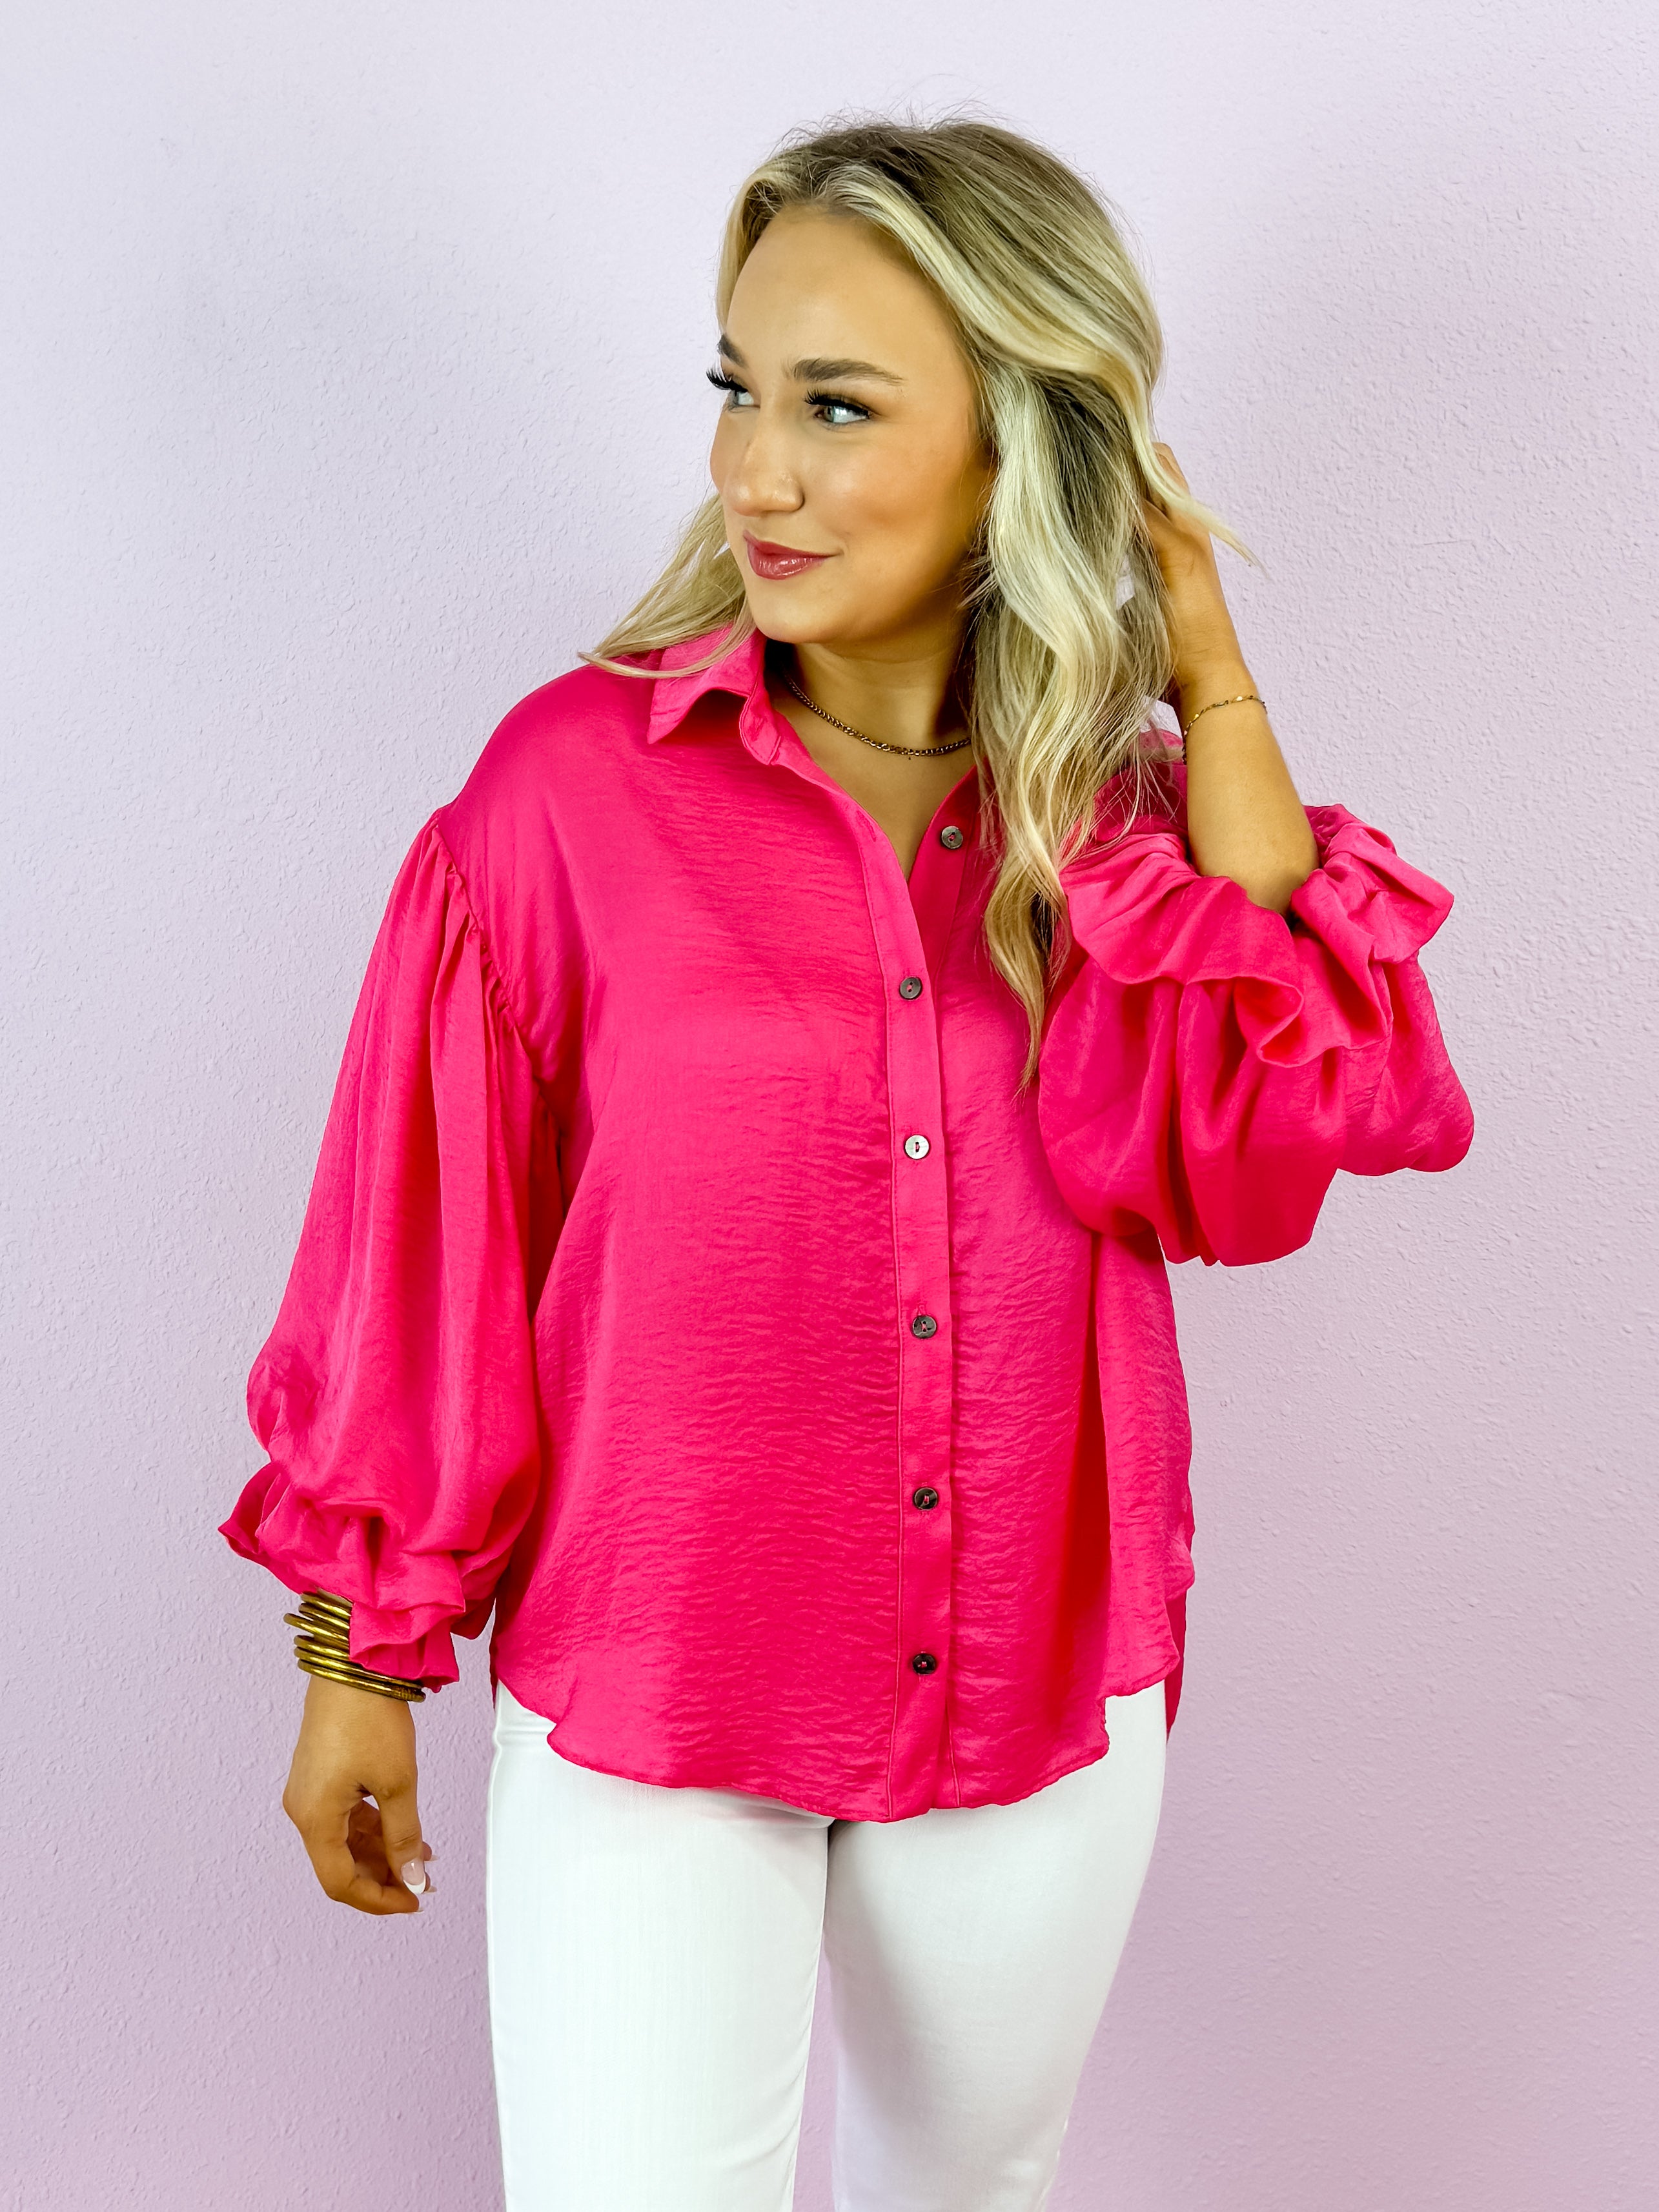 Satin Collared Button-Down Top in Hot Pink